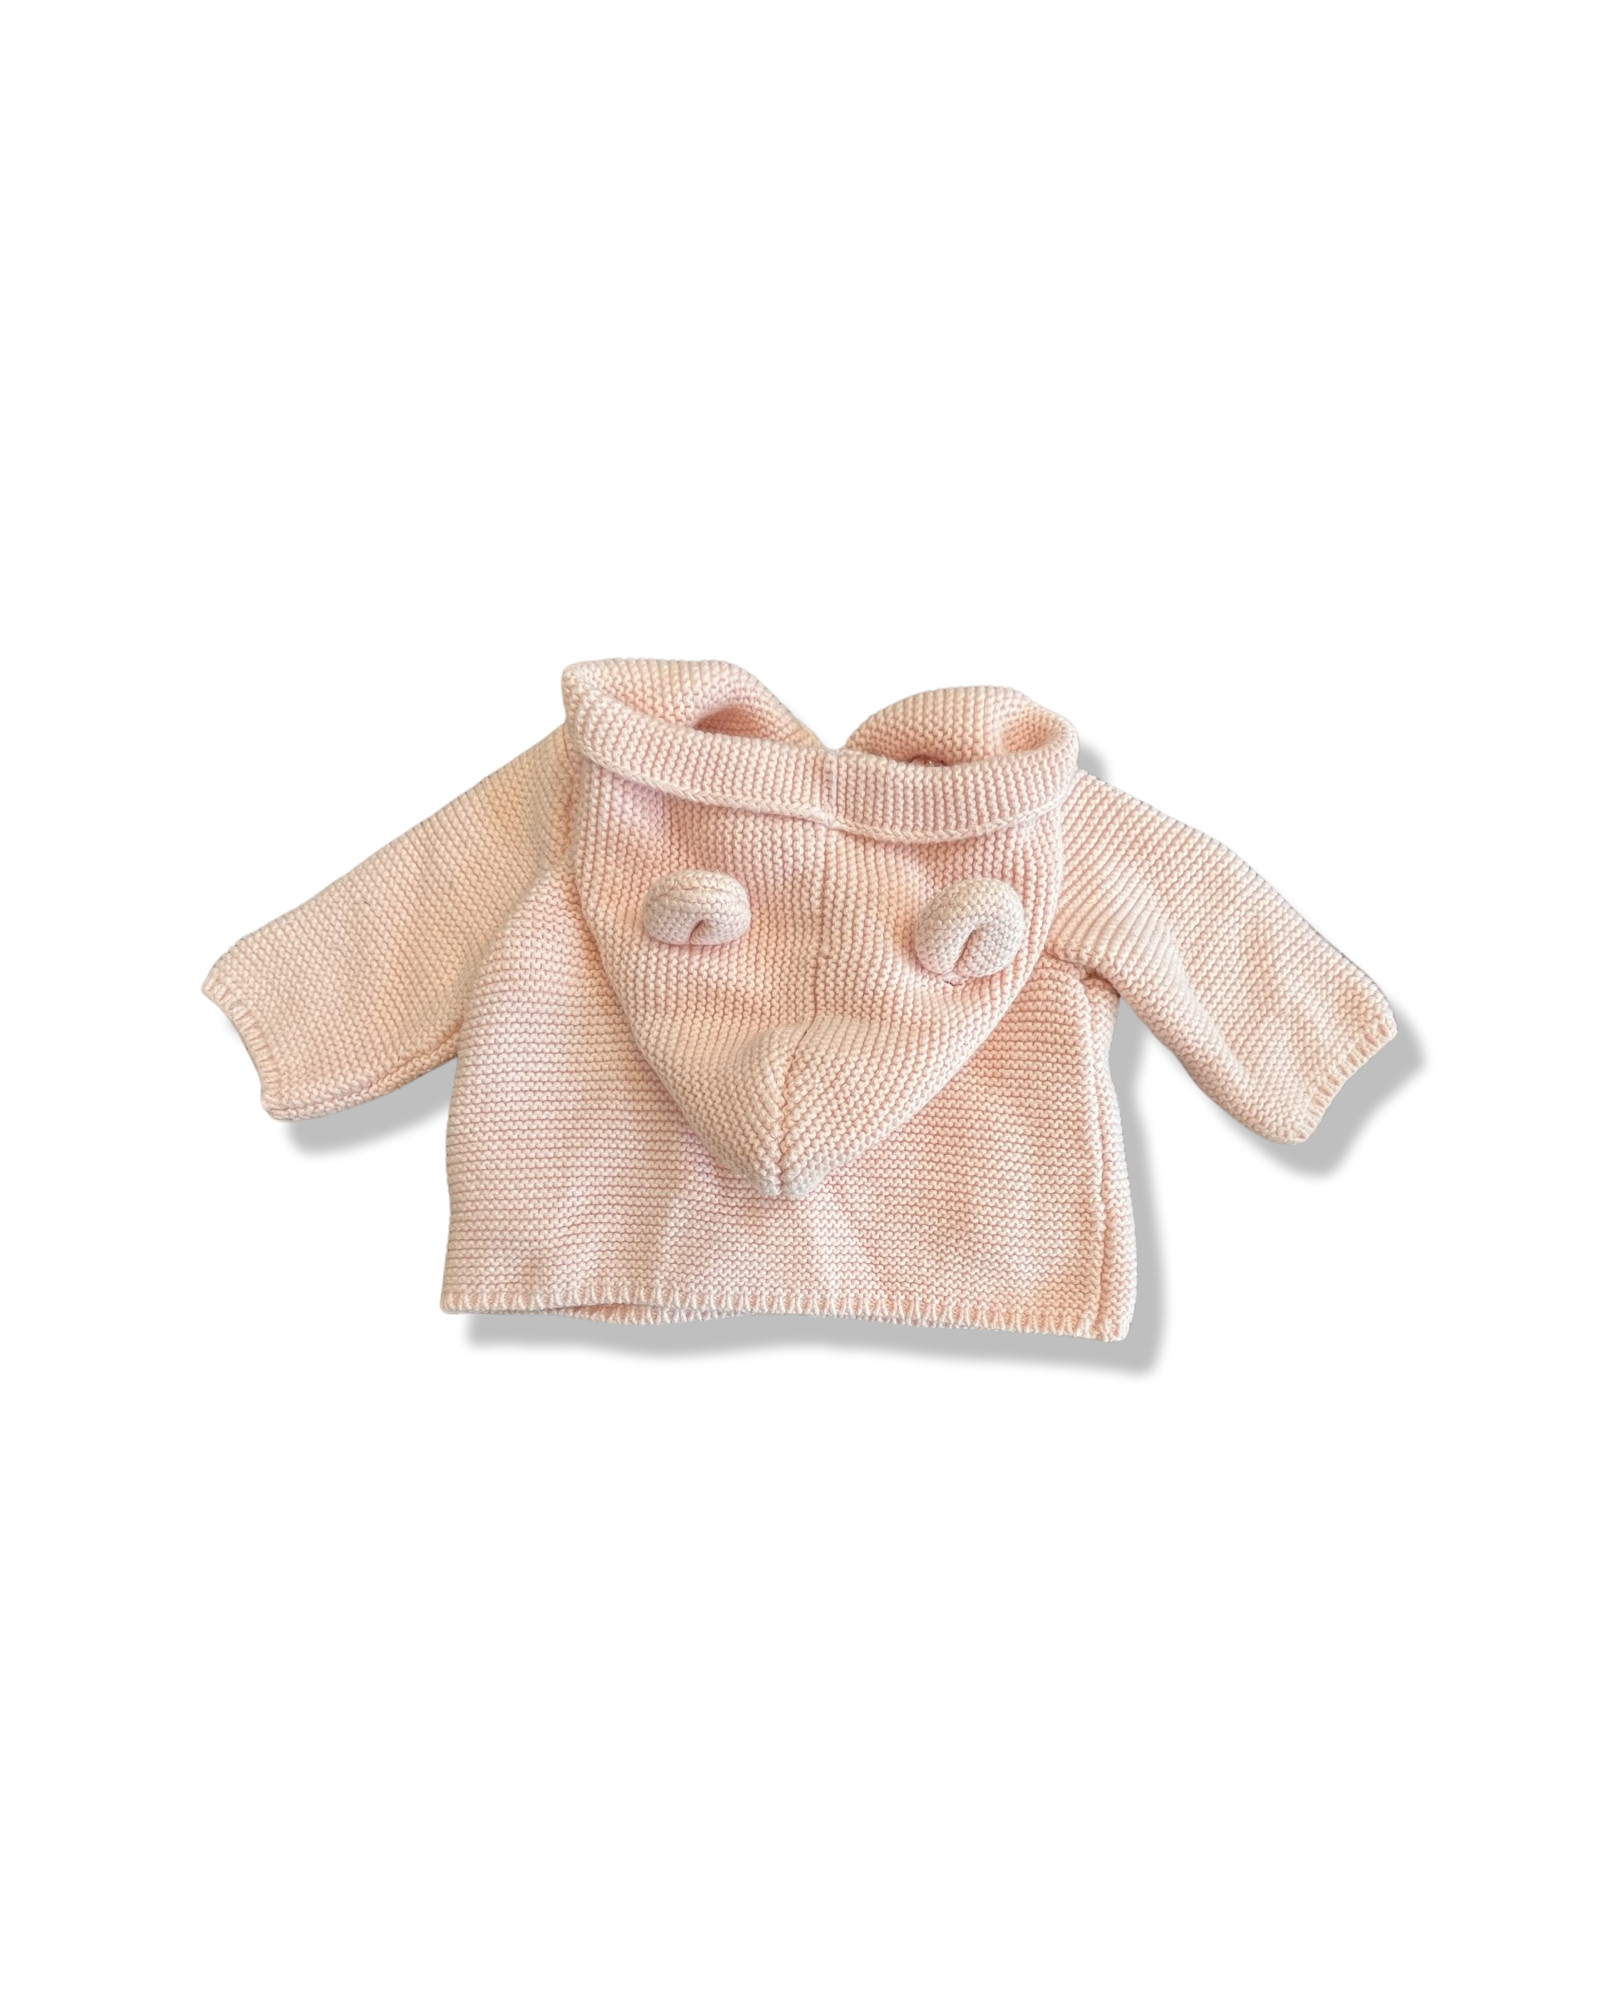 Baby Gap Pink Knit Sweater with Ears (3-6M)